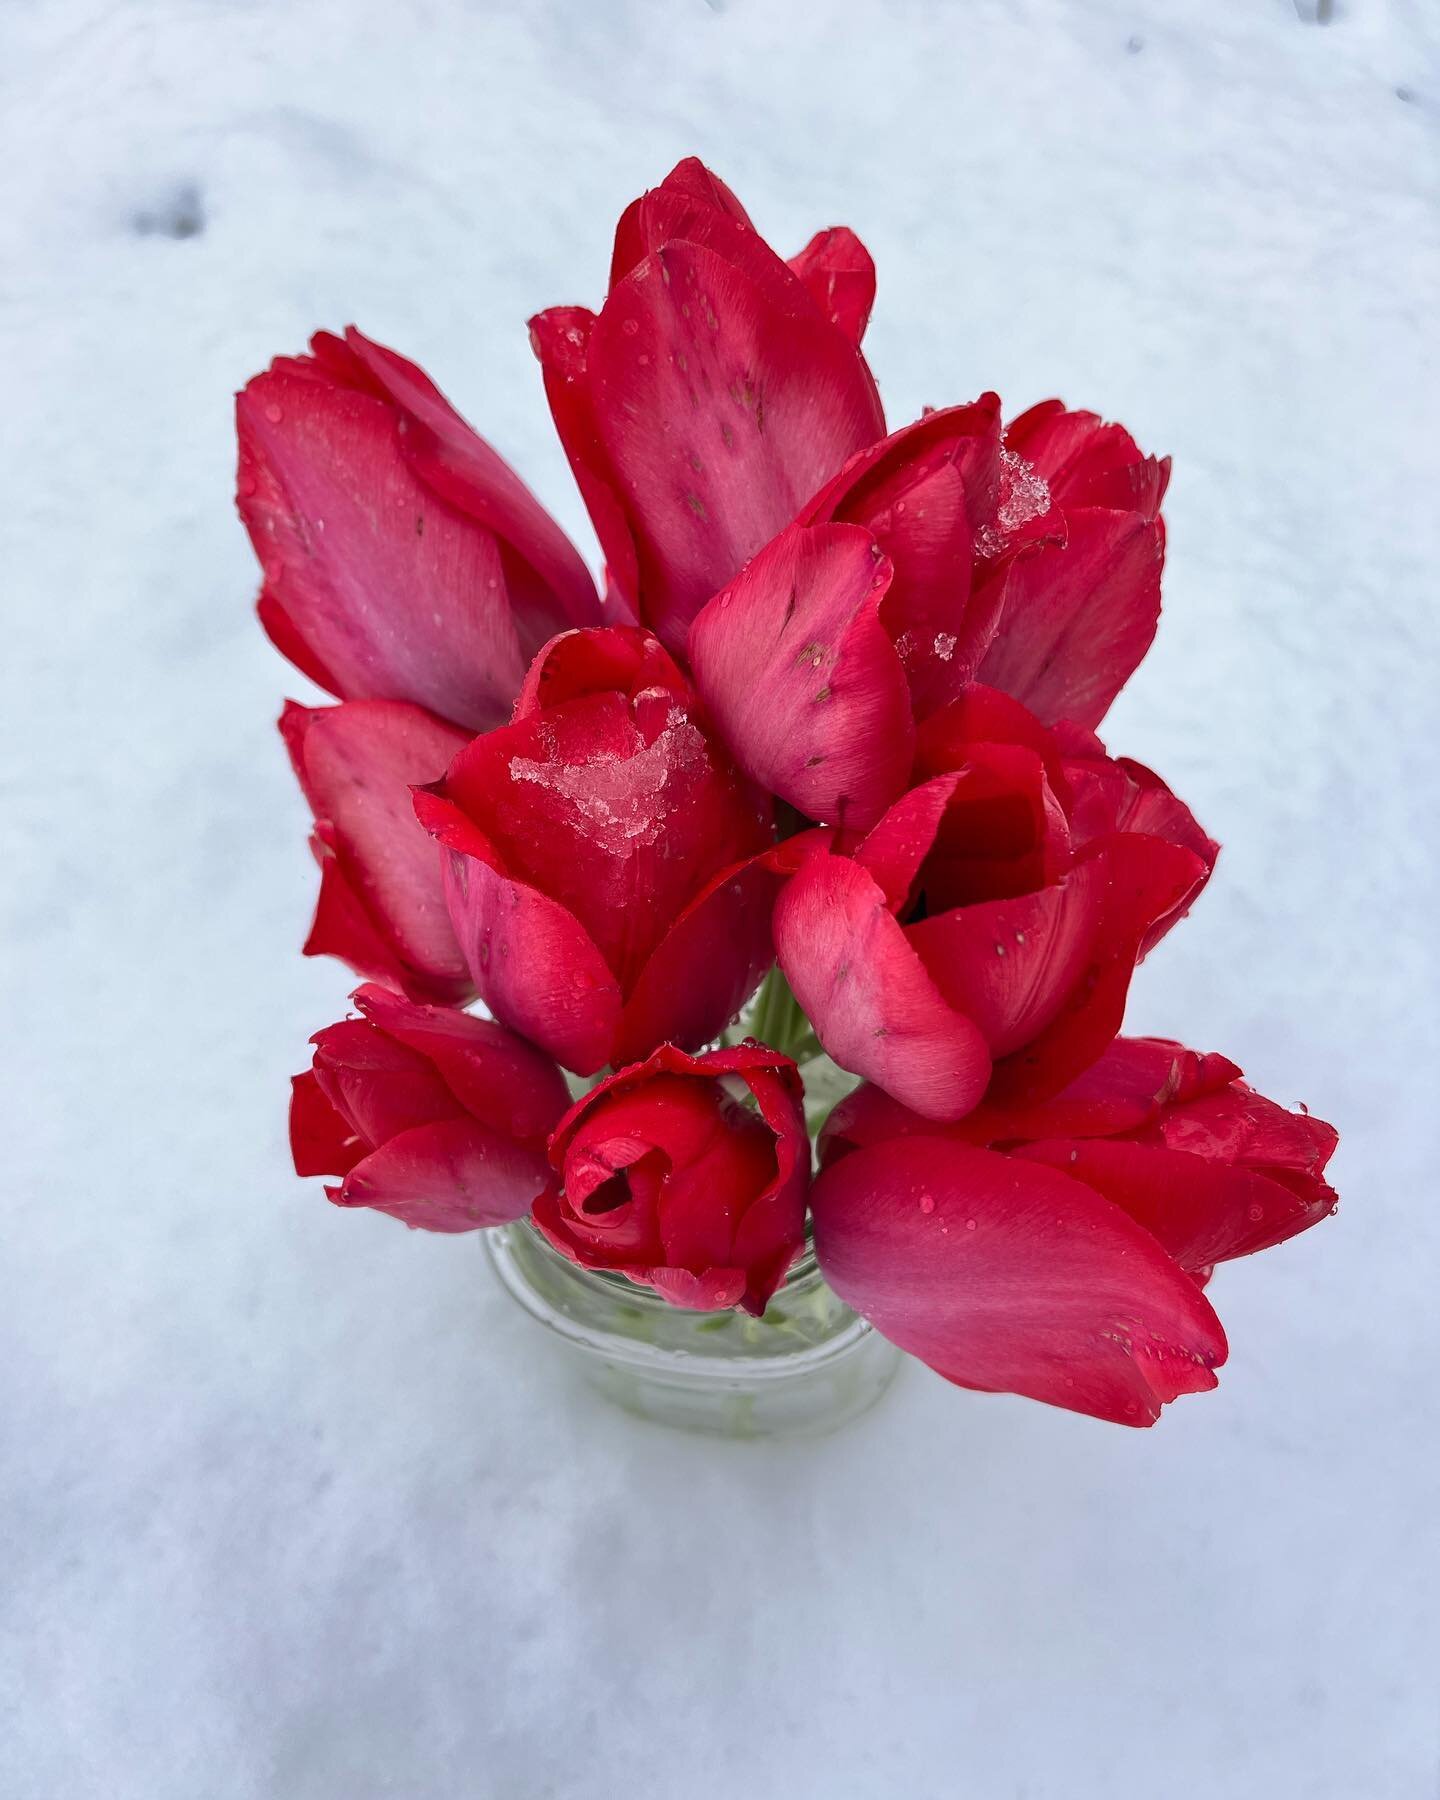 Rescuing tulips in the snow 🌷

#lovemyyard #pinktulips #tulipsinthesnow